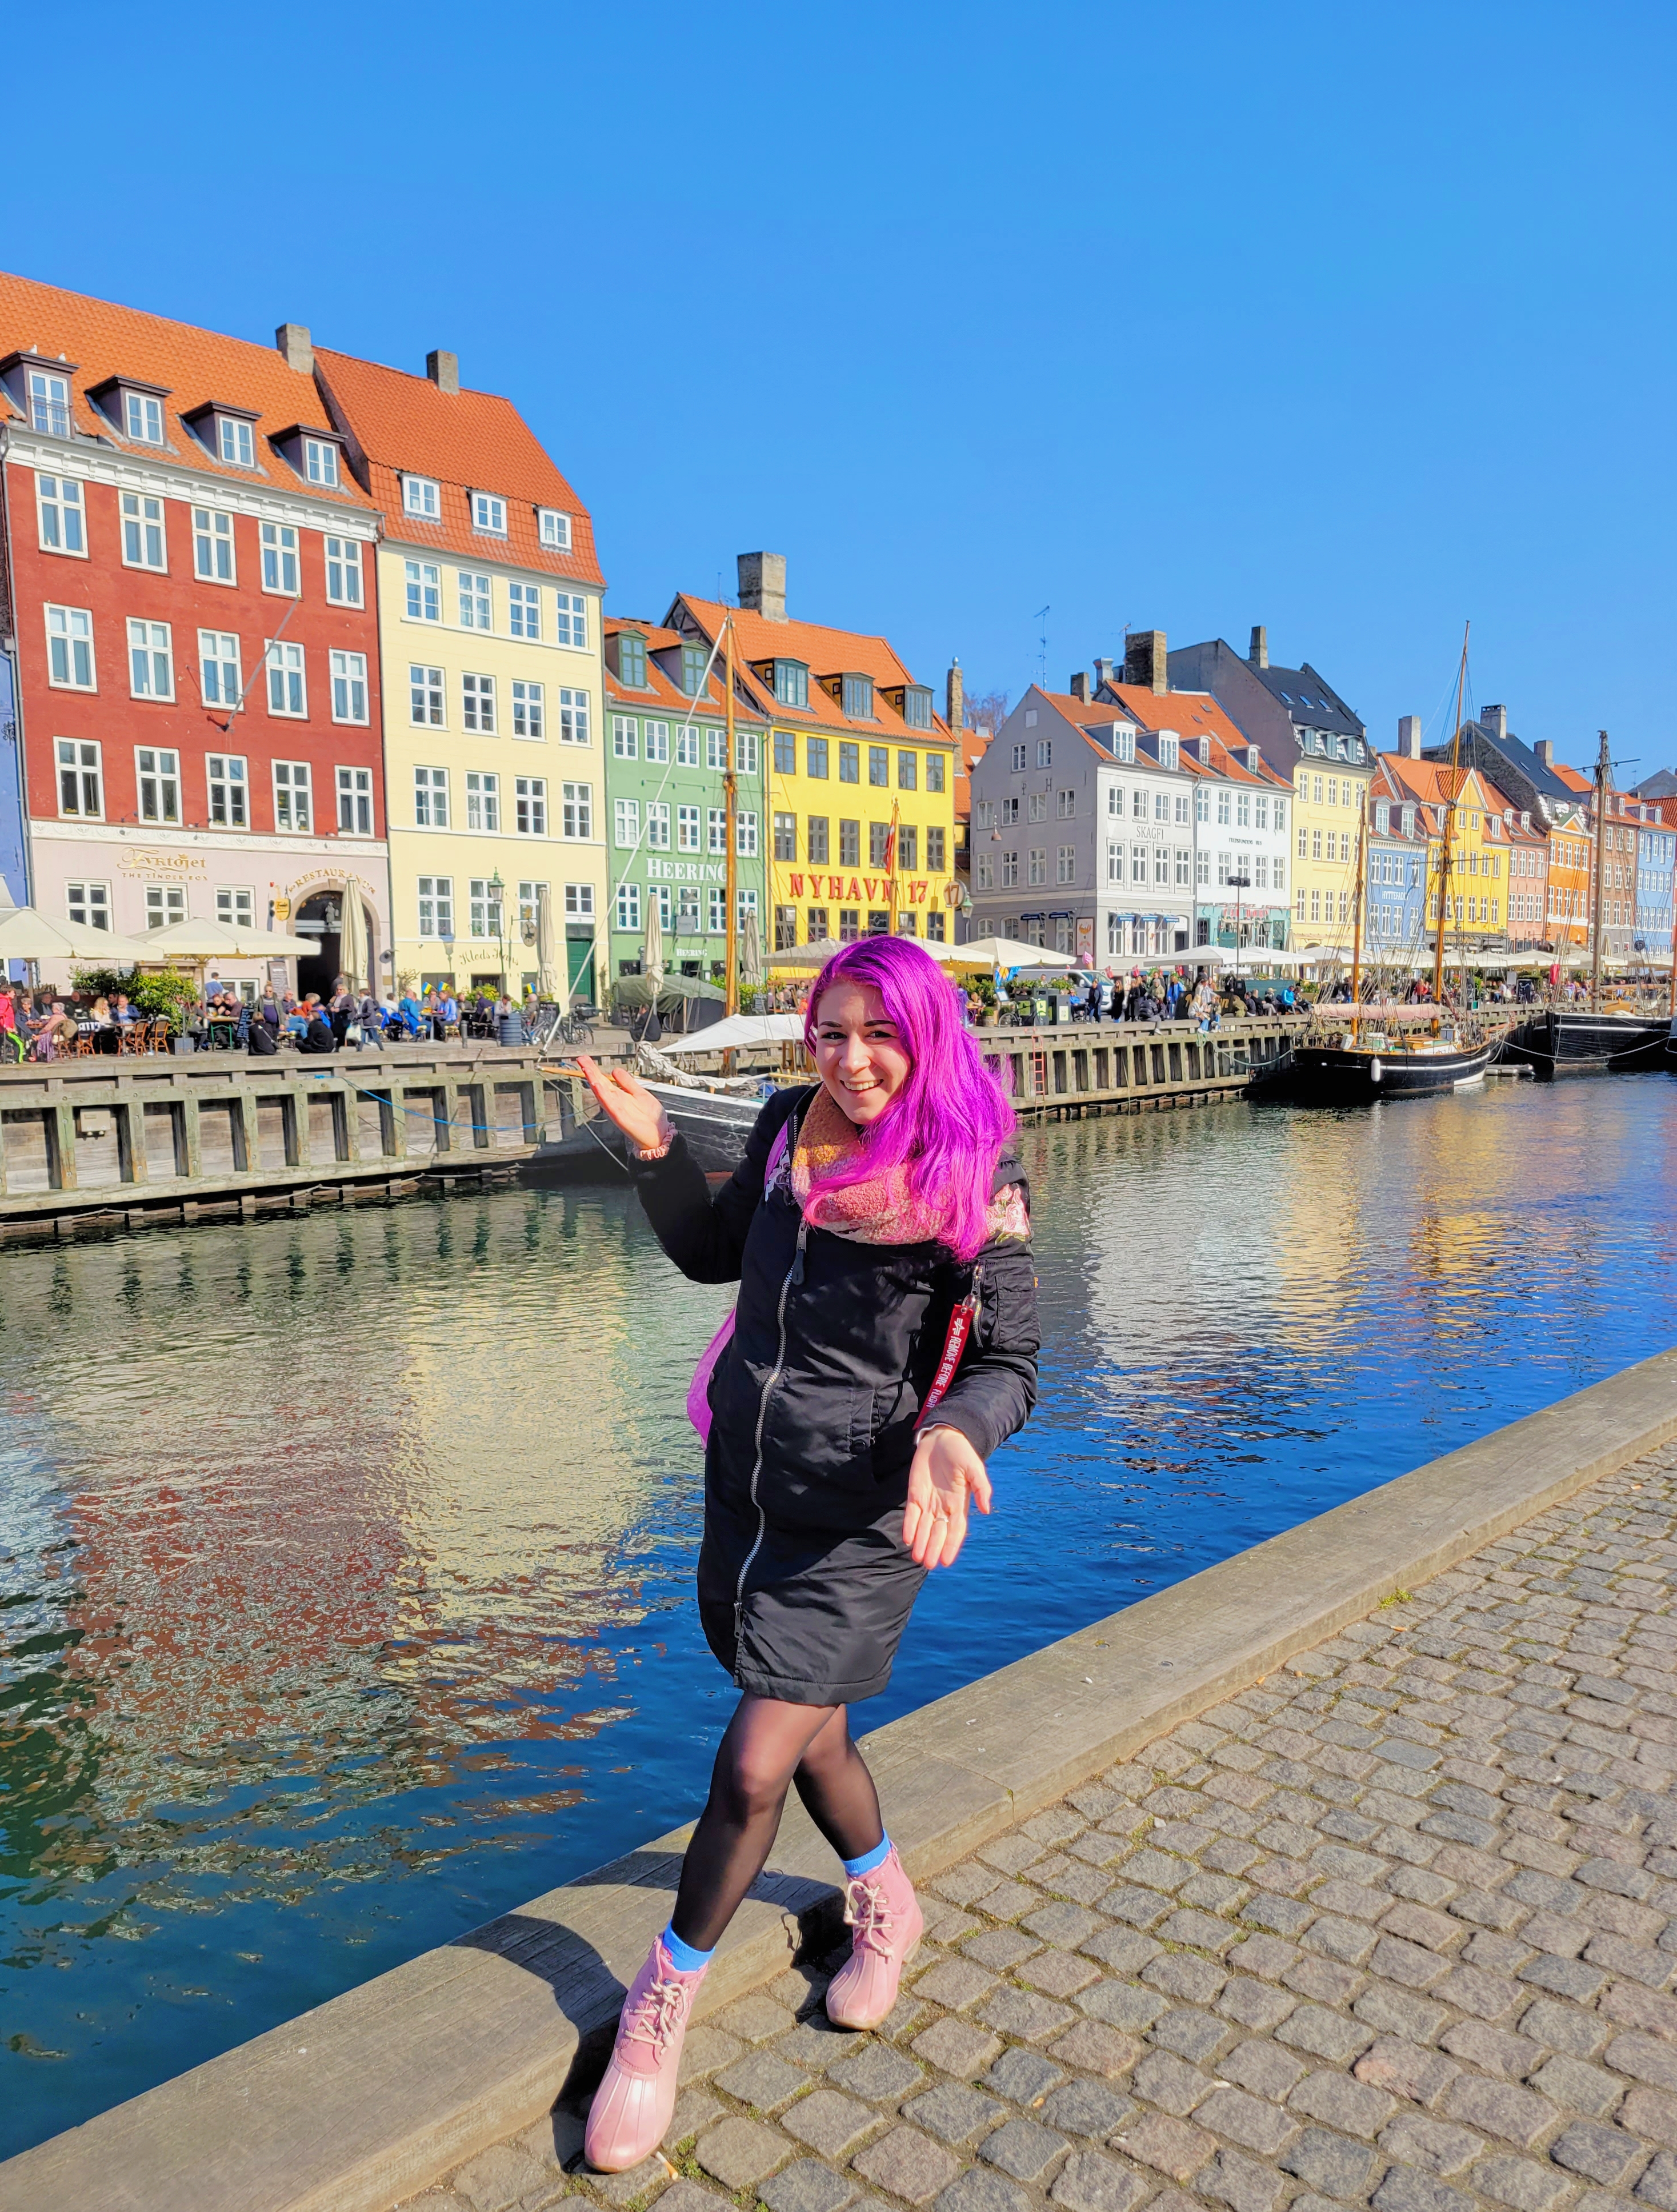 Danielle Silverman with pink hair in front of a canal with colorful houses in the background - possibly Amsterdam